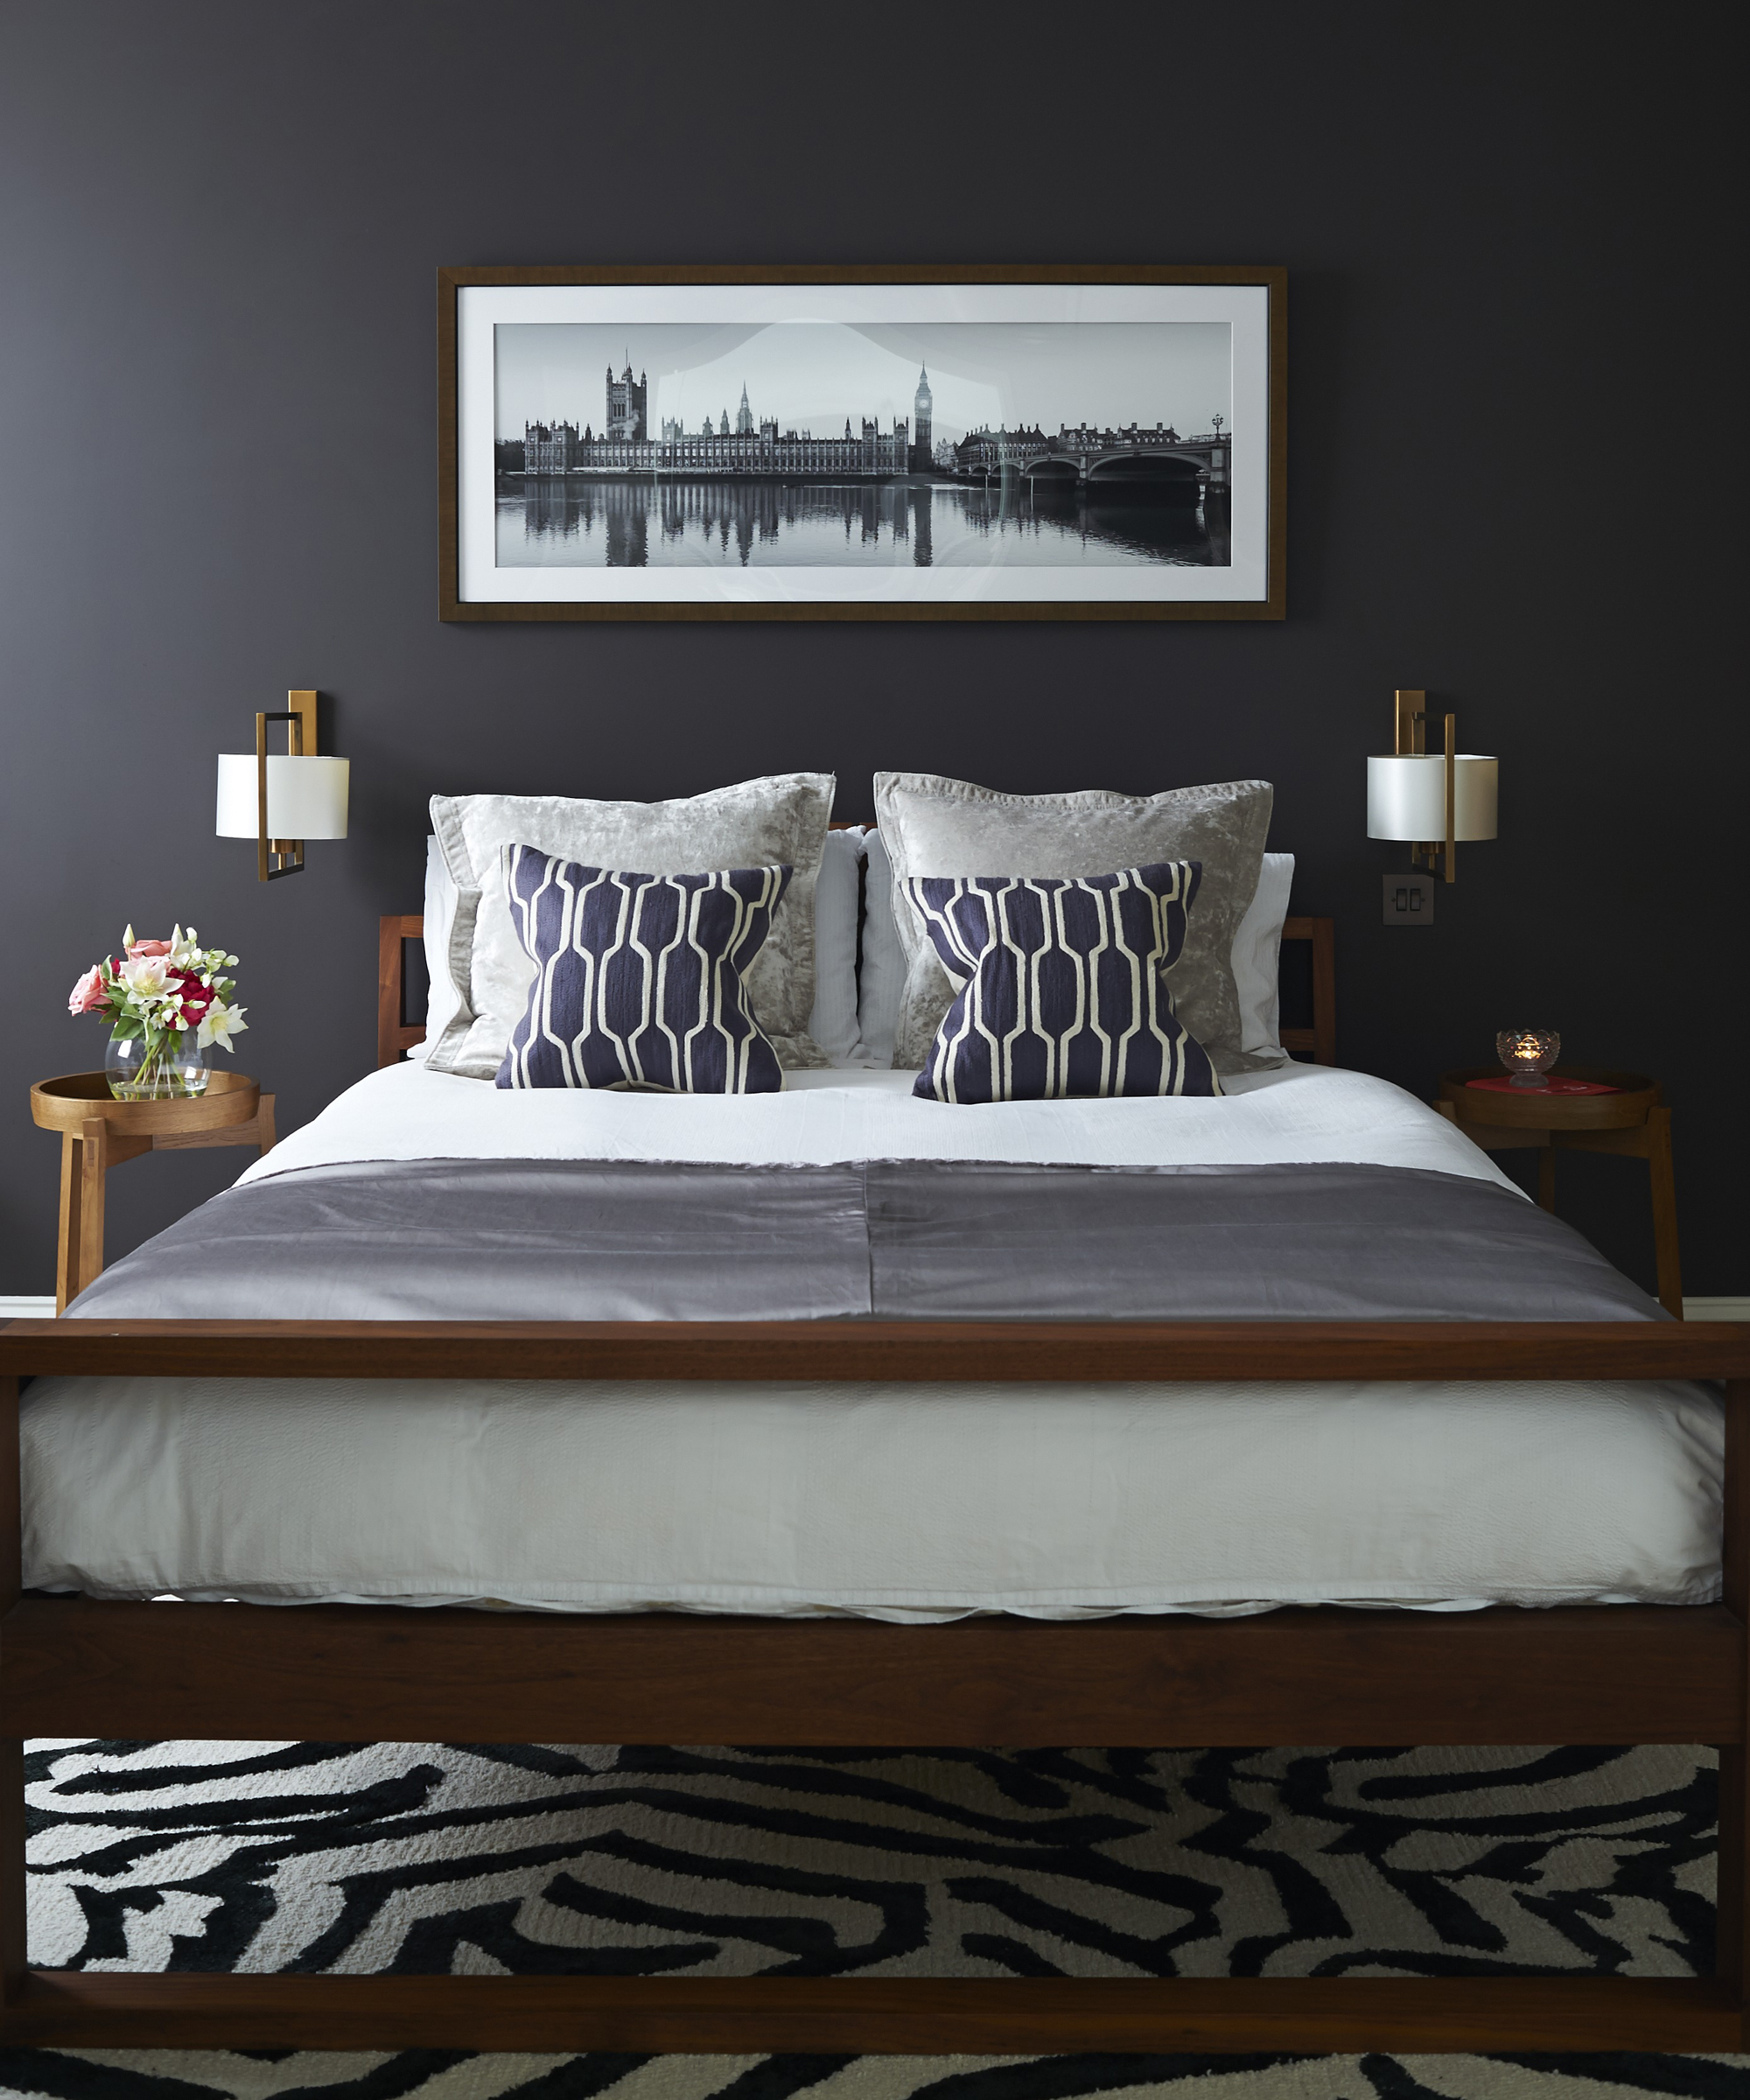 A black bedroom with wooden bed, white linen and a black and white striped rug